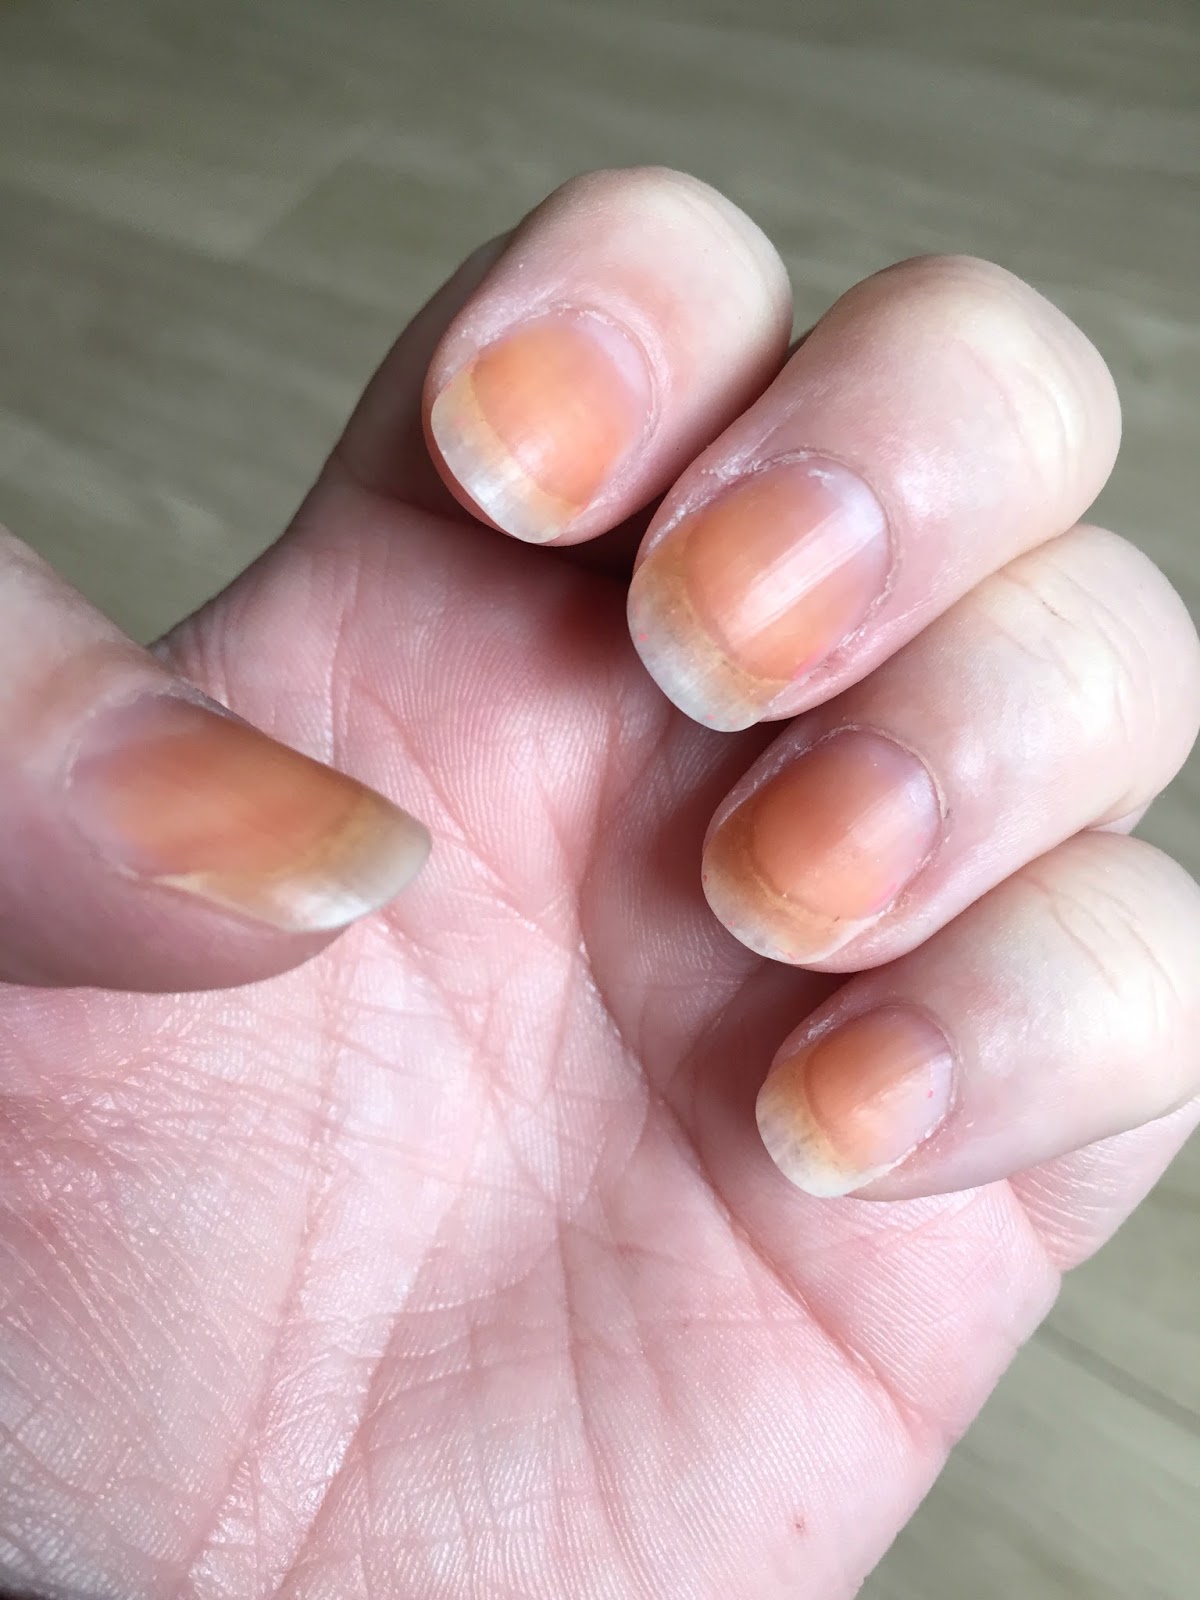 Ruth Langsford - HELP! Tumeric isn't coming off despite much scrubbing with  my fav stain remover! Any suggestions @hemsleyhemsley Anyone?! #yellownails  | Facebook